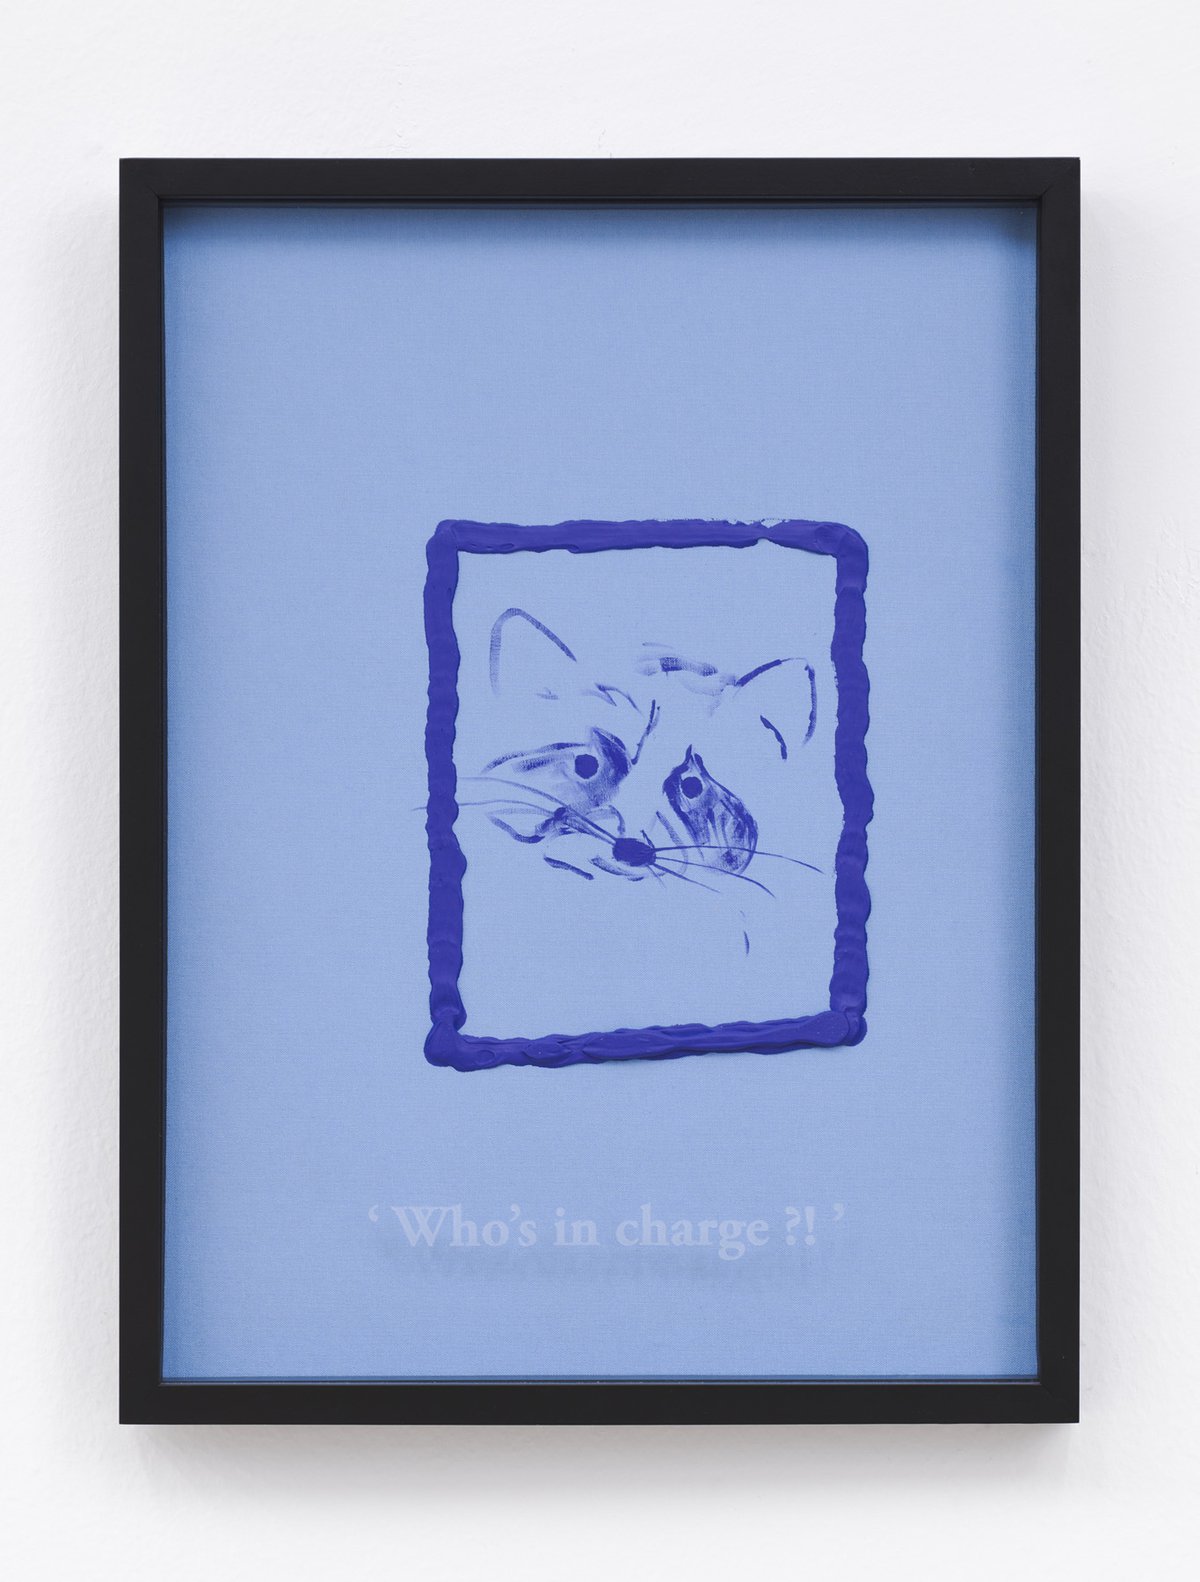 Philipp Timischl&quot;Who&#x27;s in charge?!&quot; (Light Blue/Ultramarin Light), 2017Acrylic on linen and glass-engraved object frame40.1 x 32.1 cm